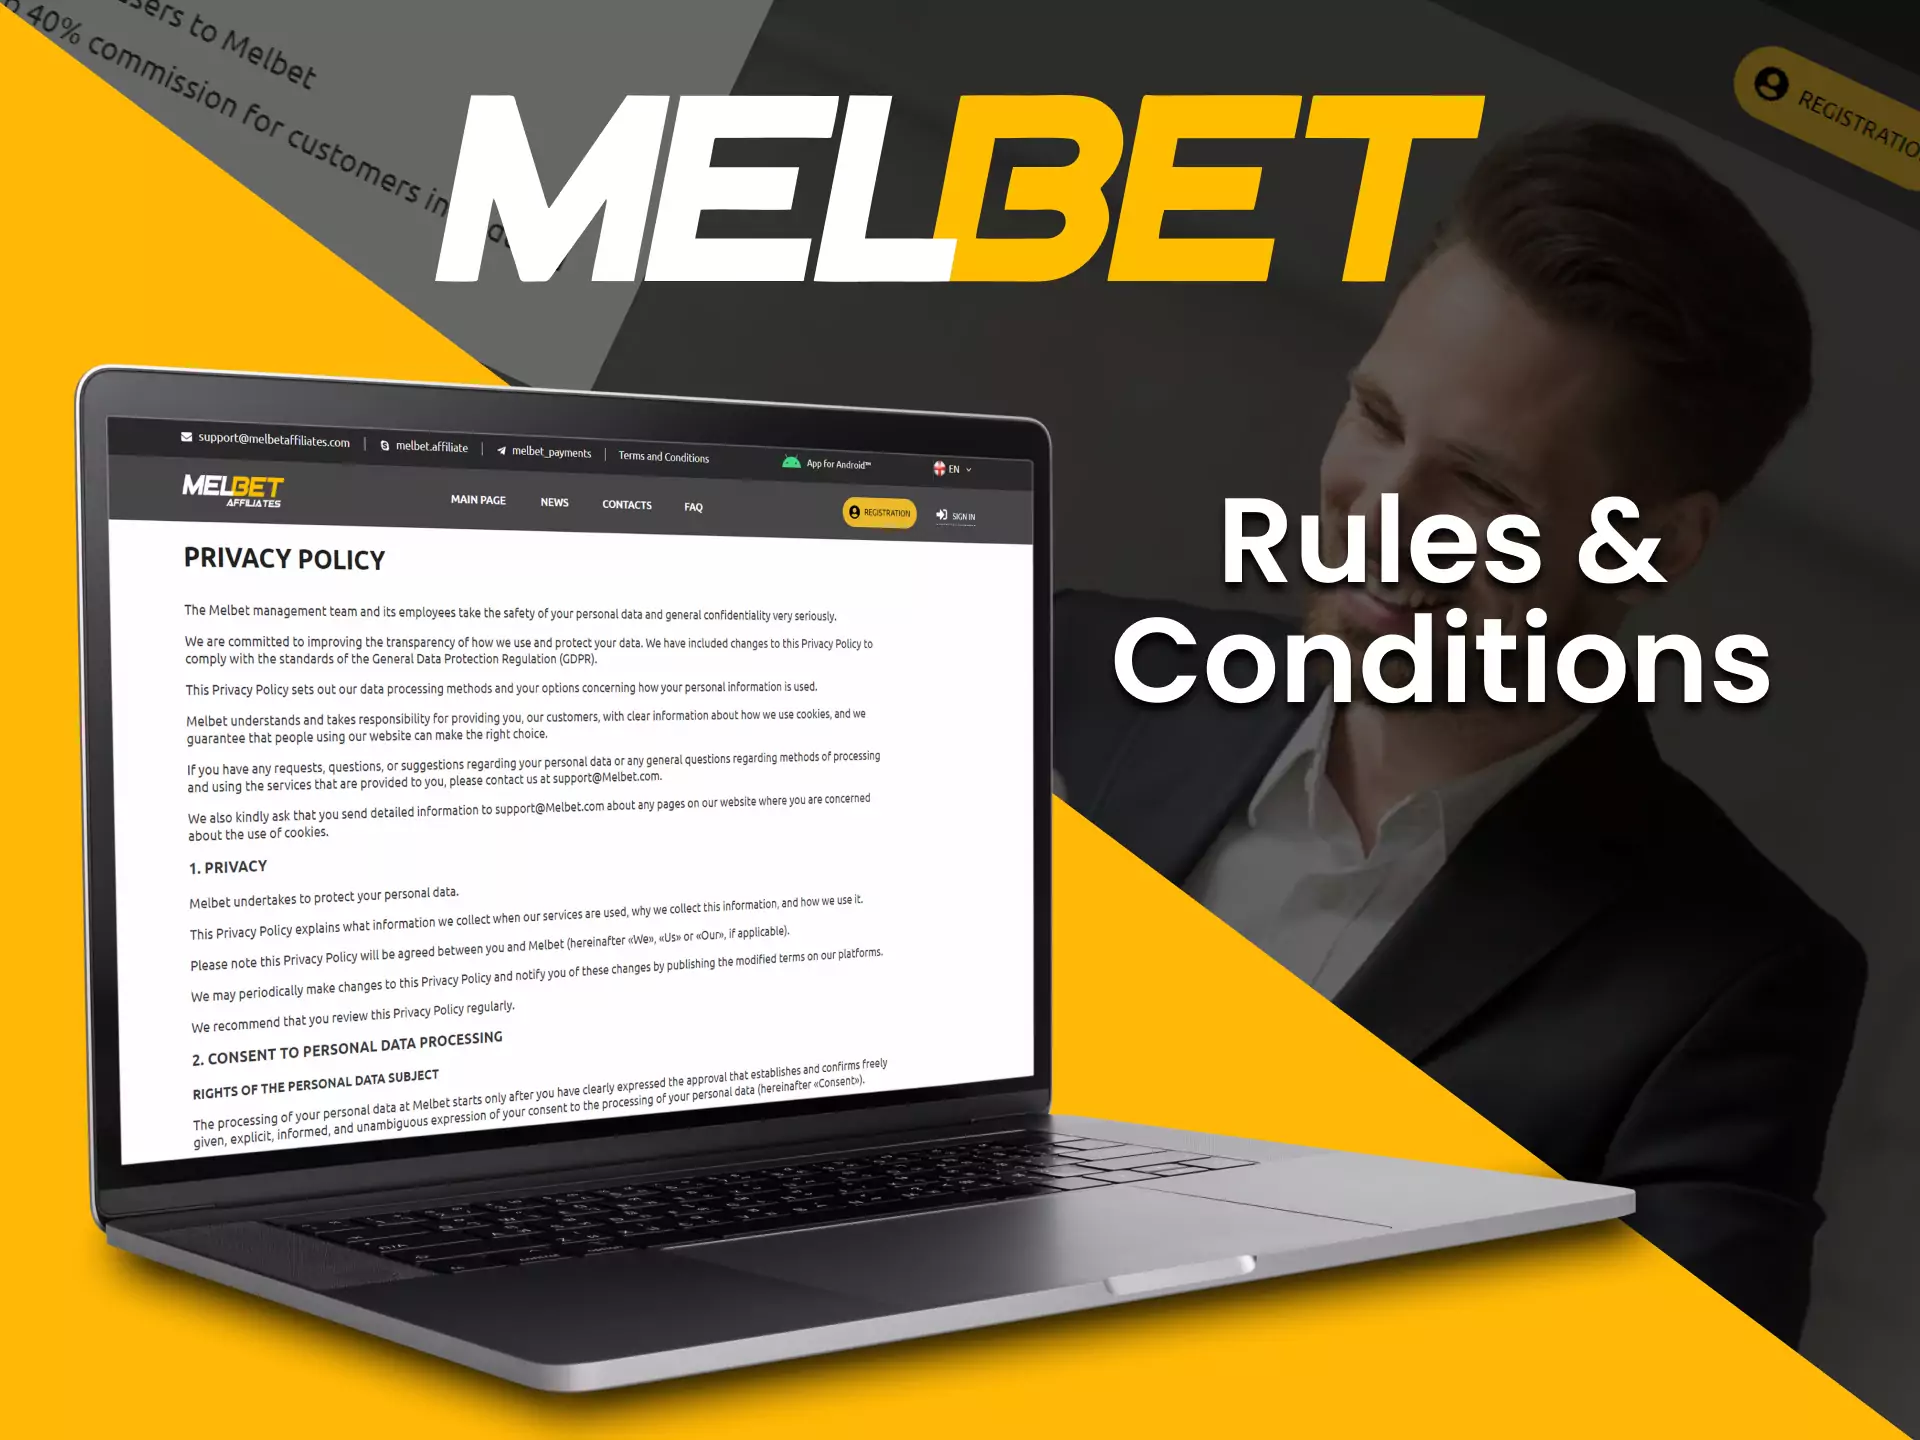 Follow the rules of the Melbet affiliate program not to be banned by the platform.